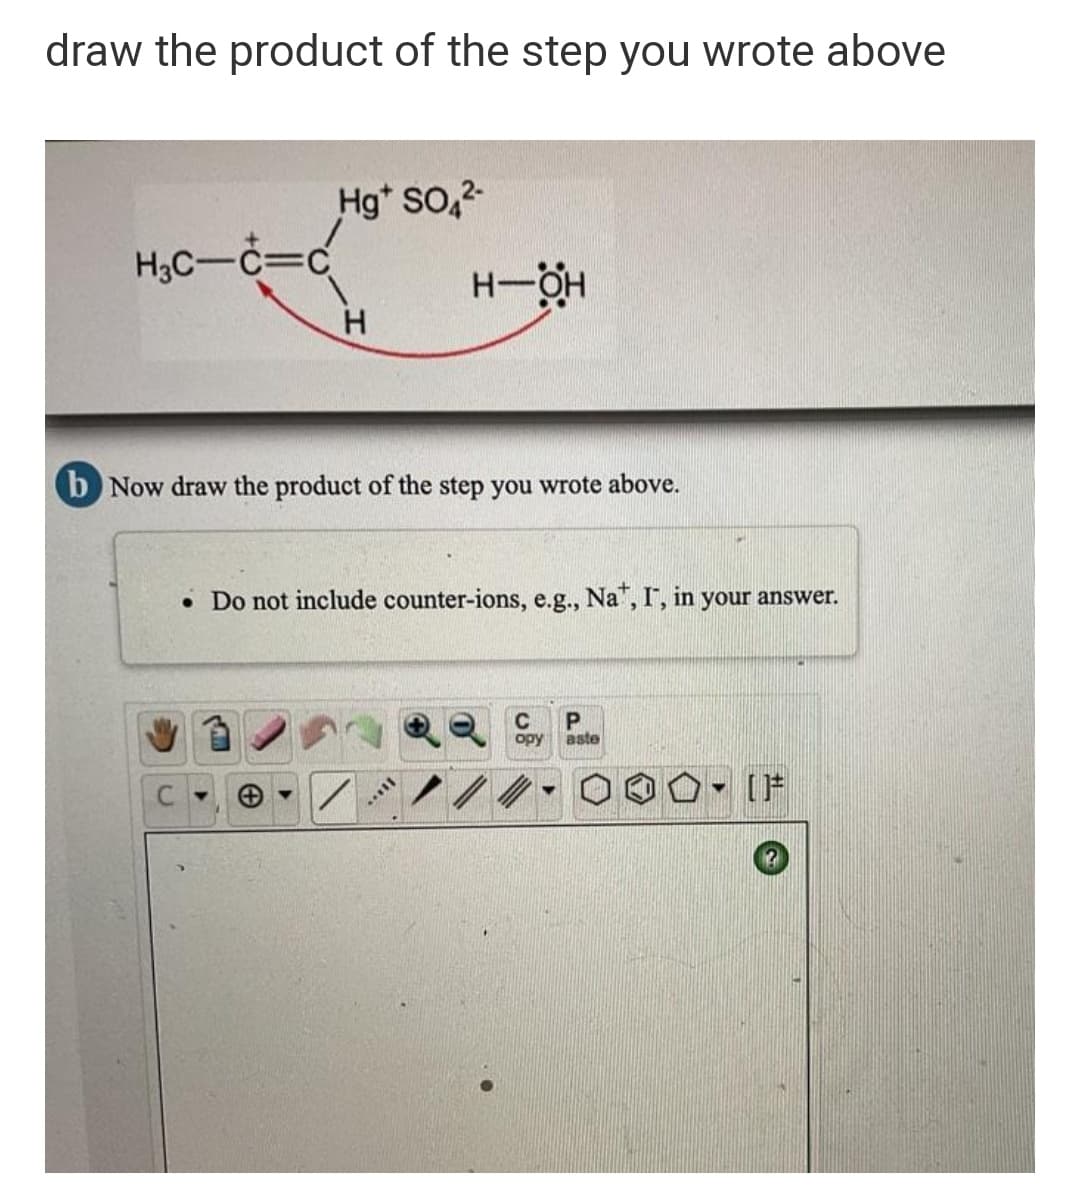 draw the product of the step you wrote above
Hg* SO,2
H3C-C=c
H-H
H.
b Now draw the product of the step you wrote above.
• Do not include counter-ions, e.g., Na", I, in your answer.
C
P
opy
aste
[片
